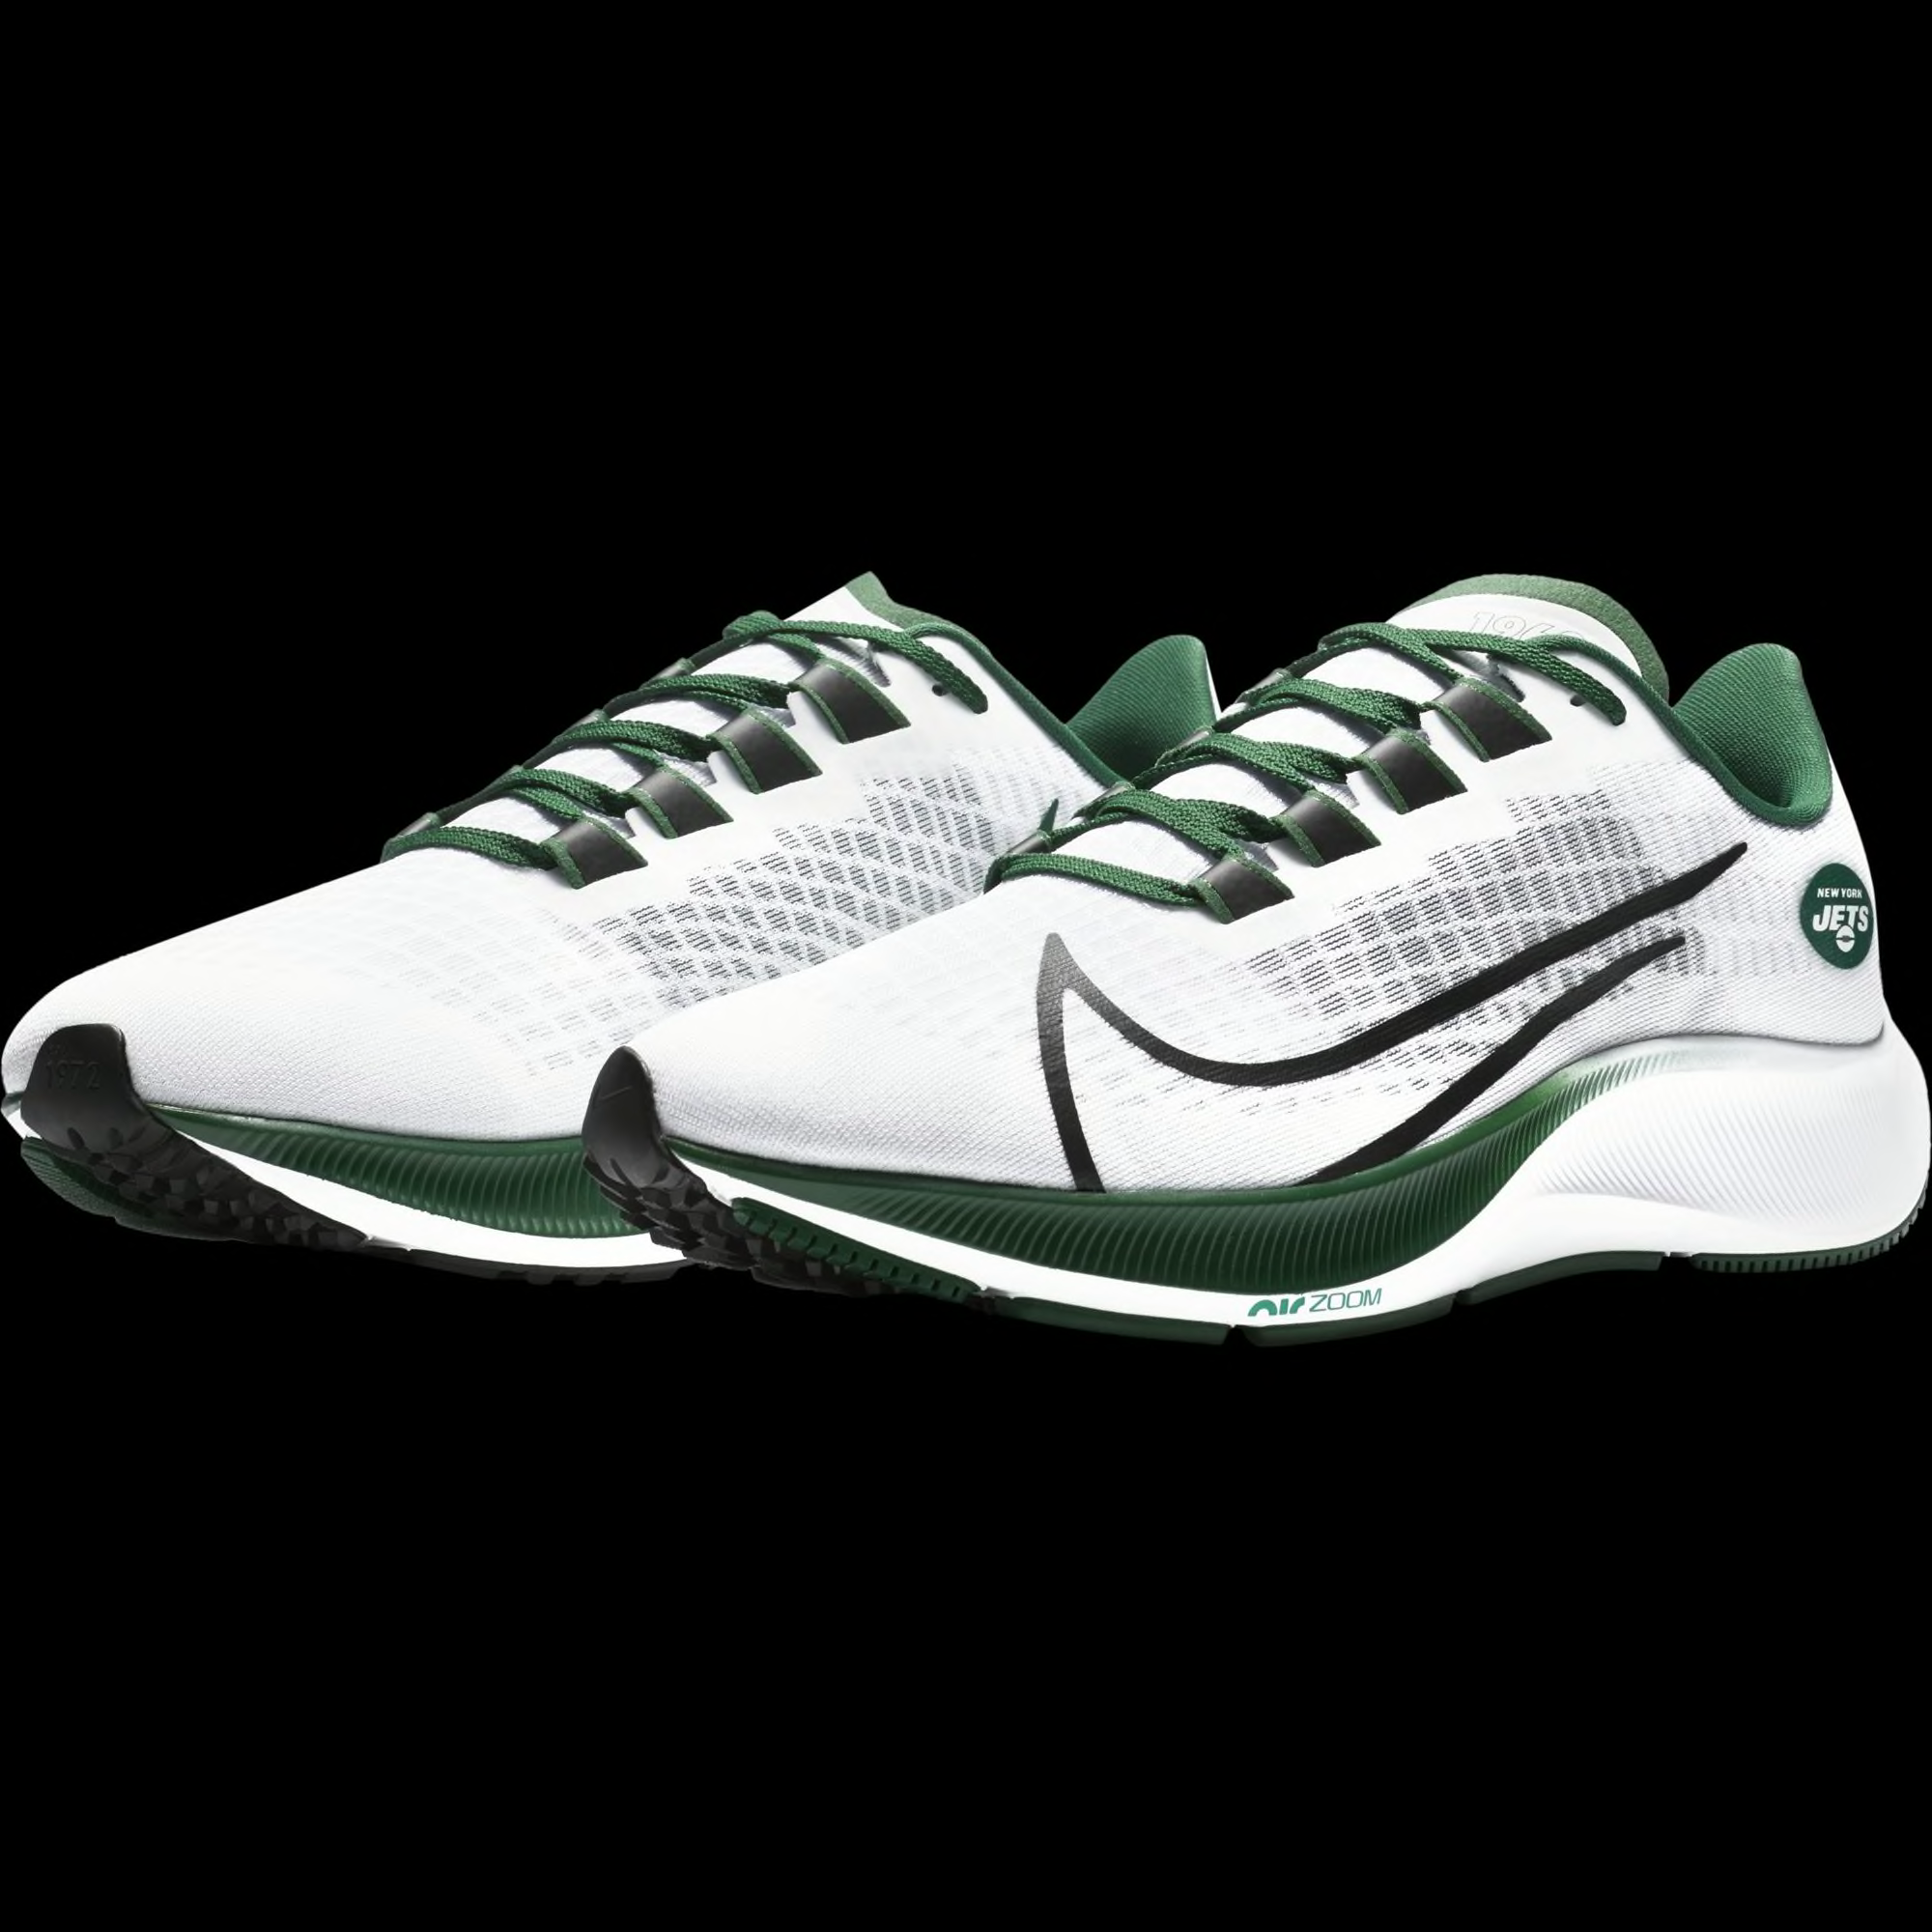 new york jets nike sneakers